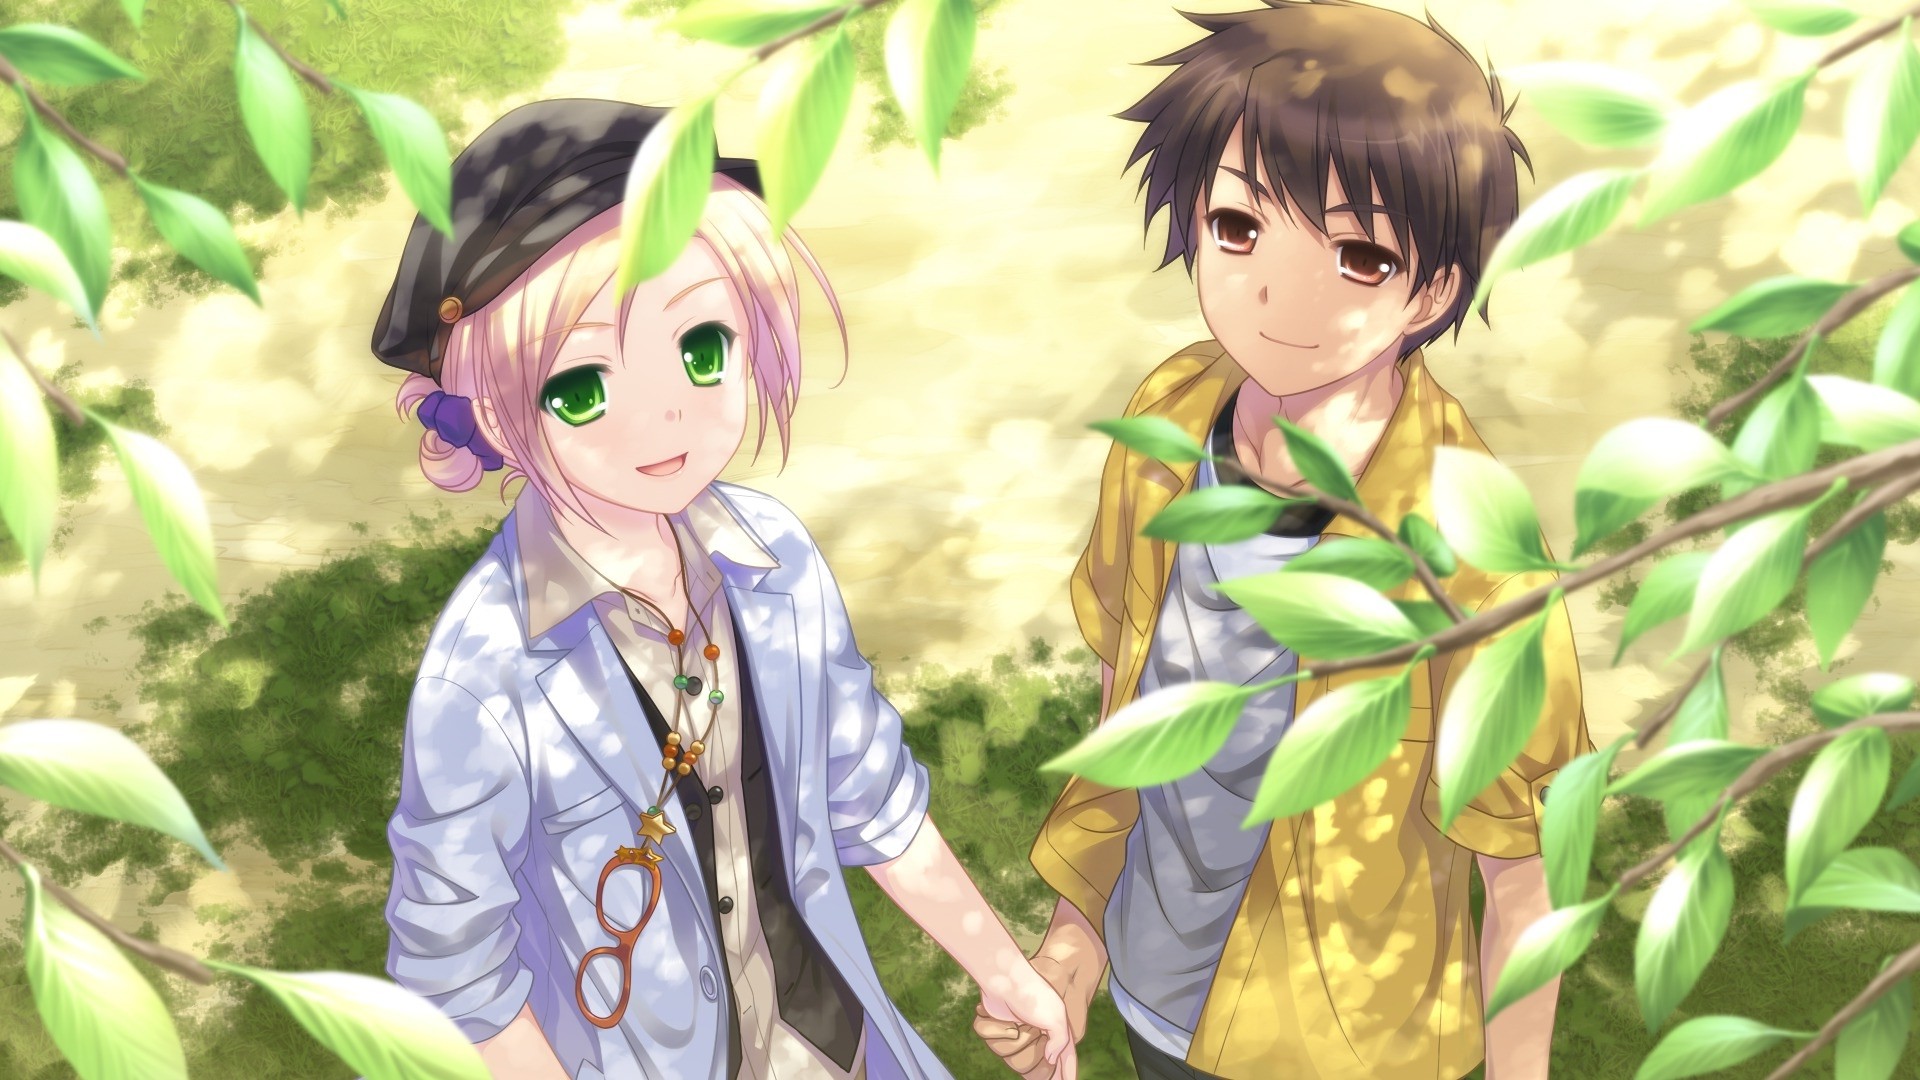 1920x1080 cute anime couples in love wallpapers | anime